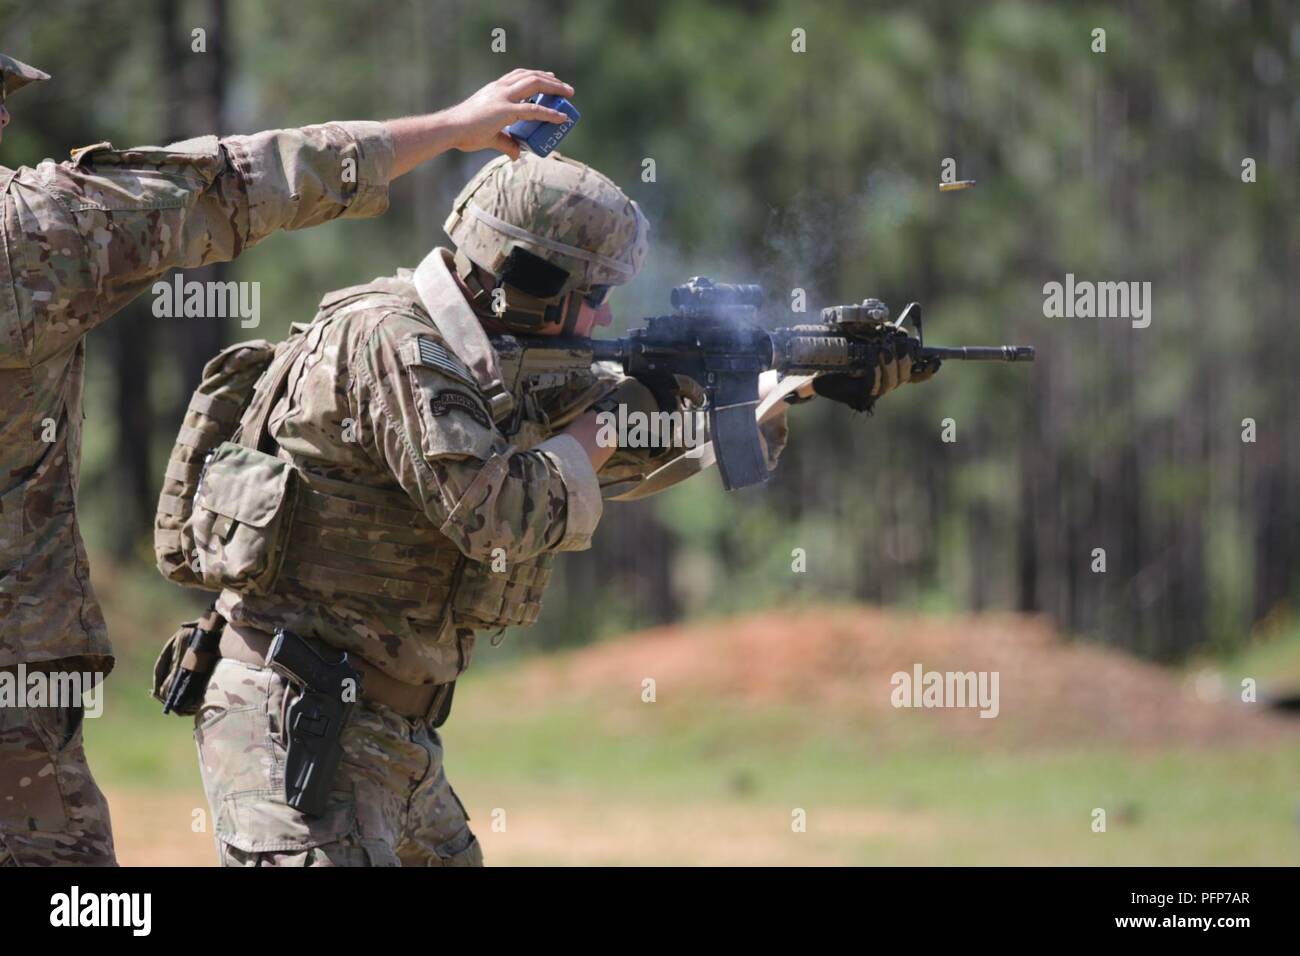 Staff Sgt. Justin Danforth, a Denver, Colorado-native and infantryman assigned to Company A, 1st Battalion, 325th Airborne Infantry Regiment, 2nd Brigade Combat Team, 82nd Airborne Division, fires an M4 Carbine during the last day of the Small Arms Competition as part of All American Week XXIX at Fort Bragg, North Carolina, May 23, 2018.  Paratroopers past and present converged on the center of the military universe to celebrate being members of the “All American” Division and America’s Guard of Honor. Stock Photo